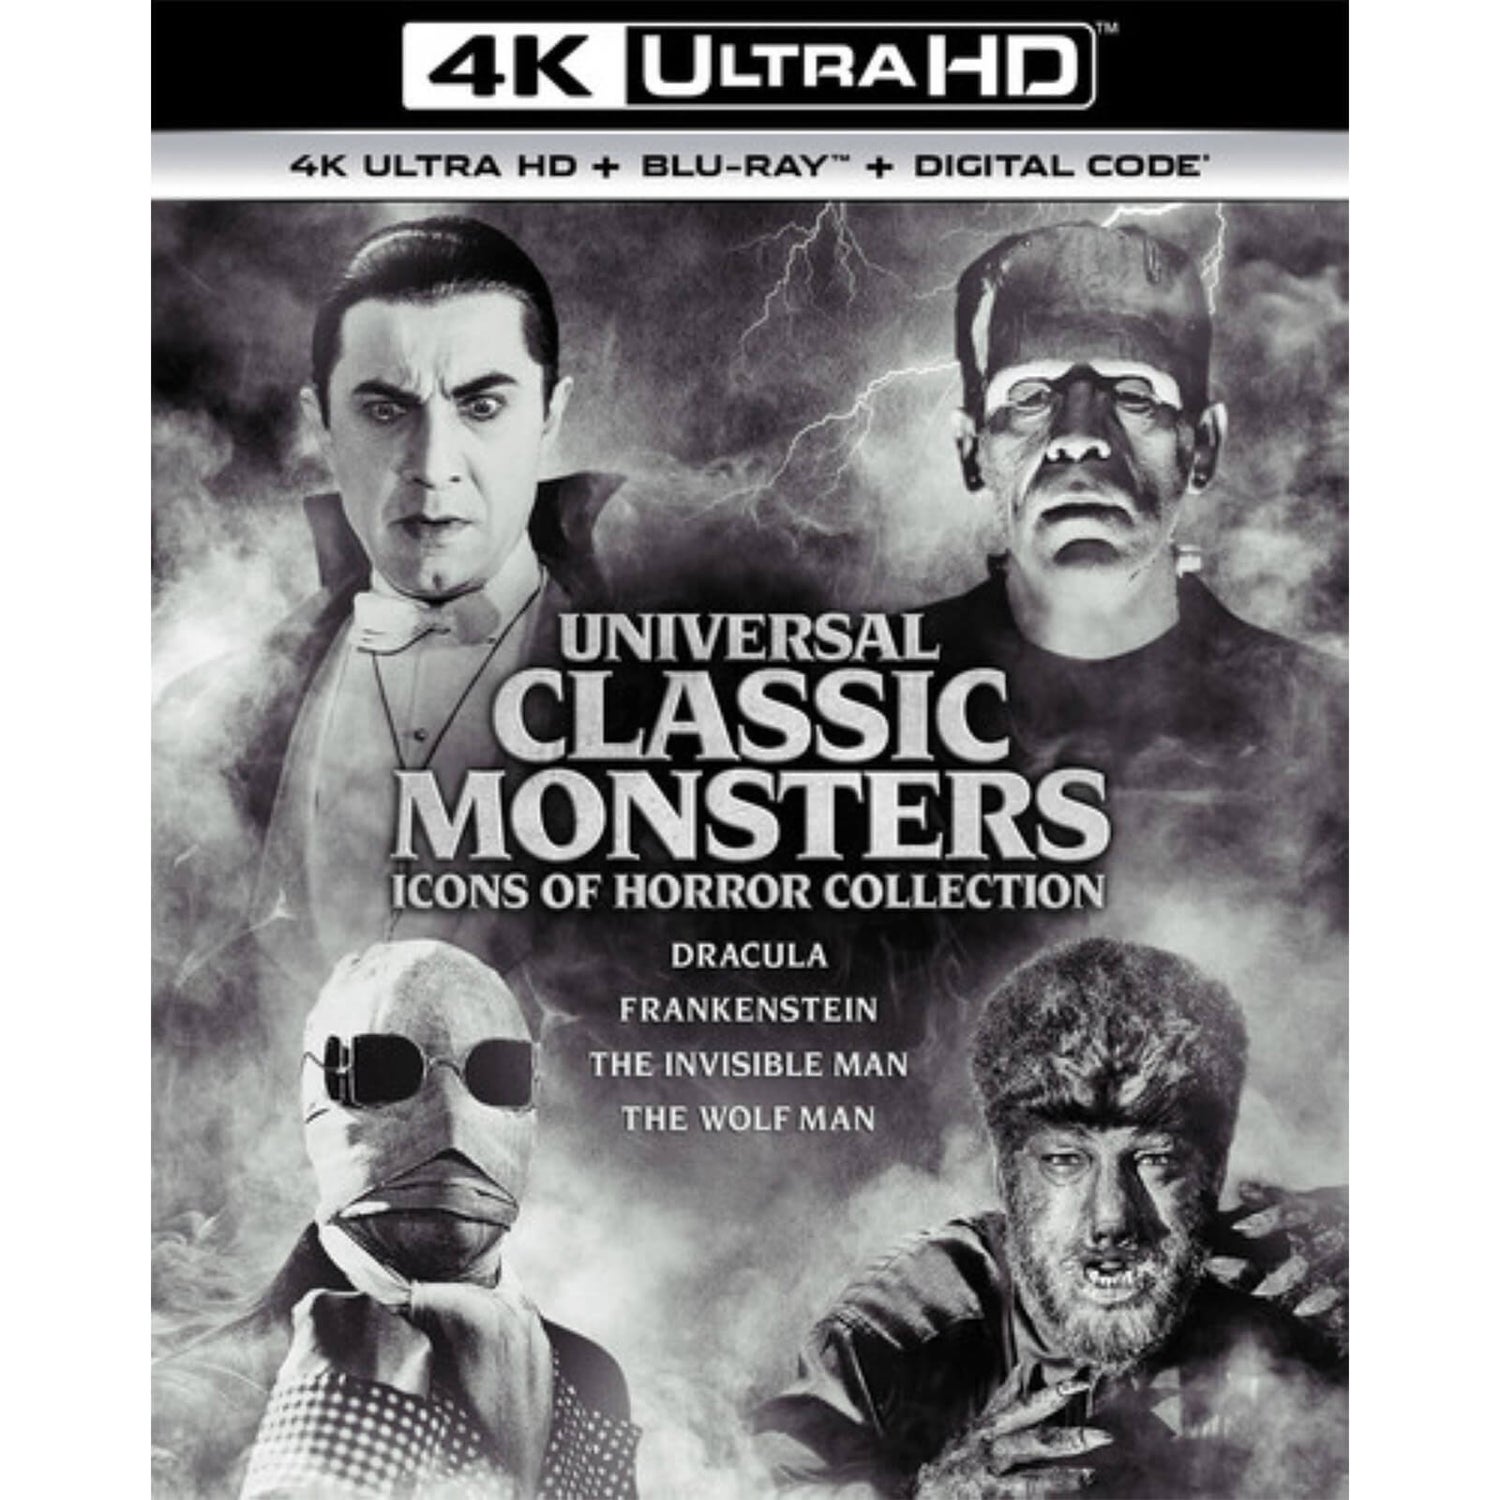 Universal Classic Monsters: Icons of Horror Collection - 4K Ultra HD (Includes Blu-ray)